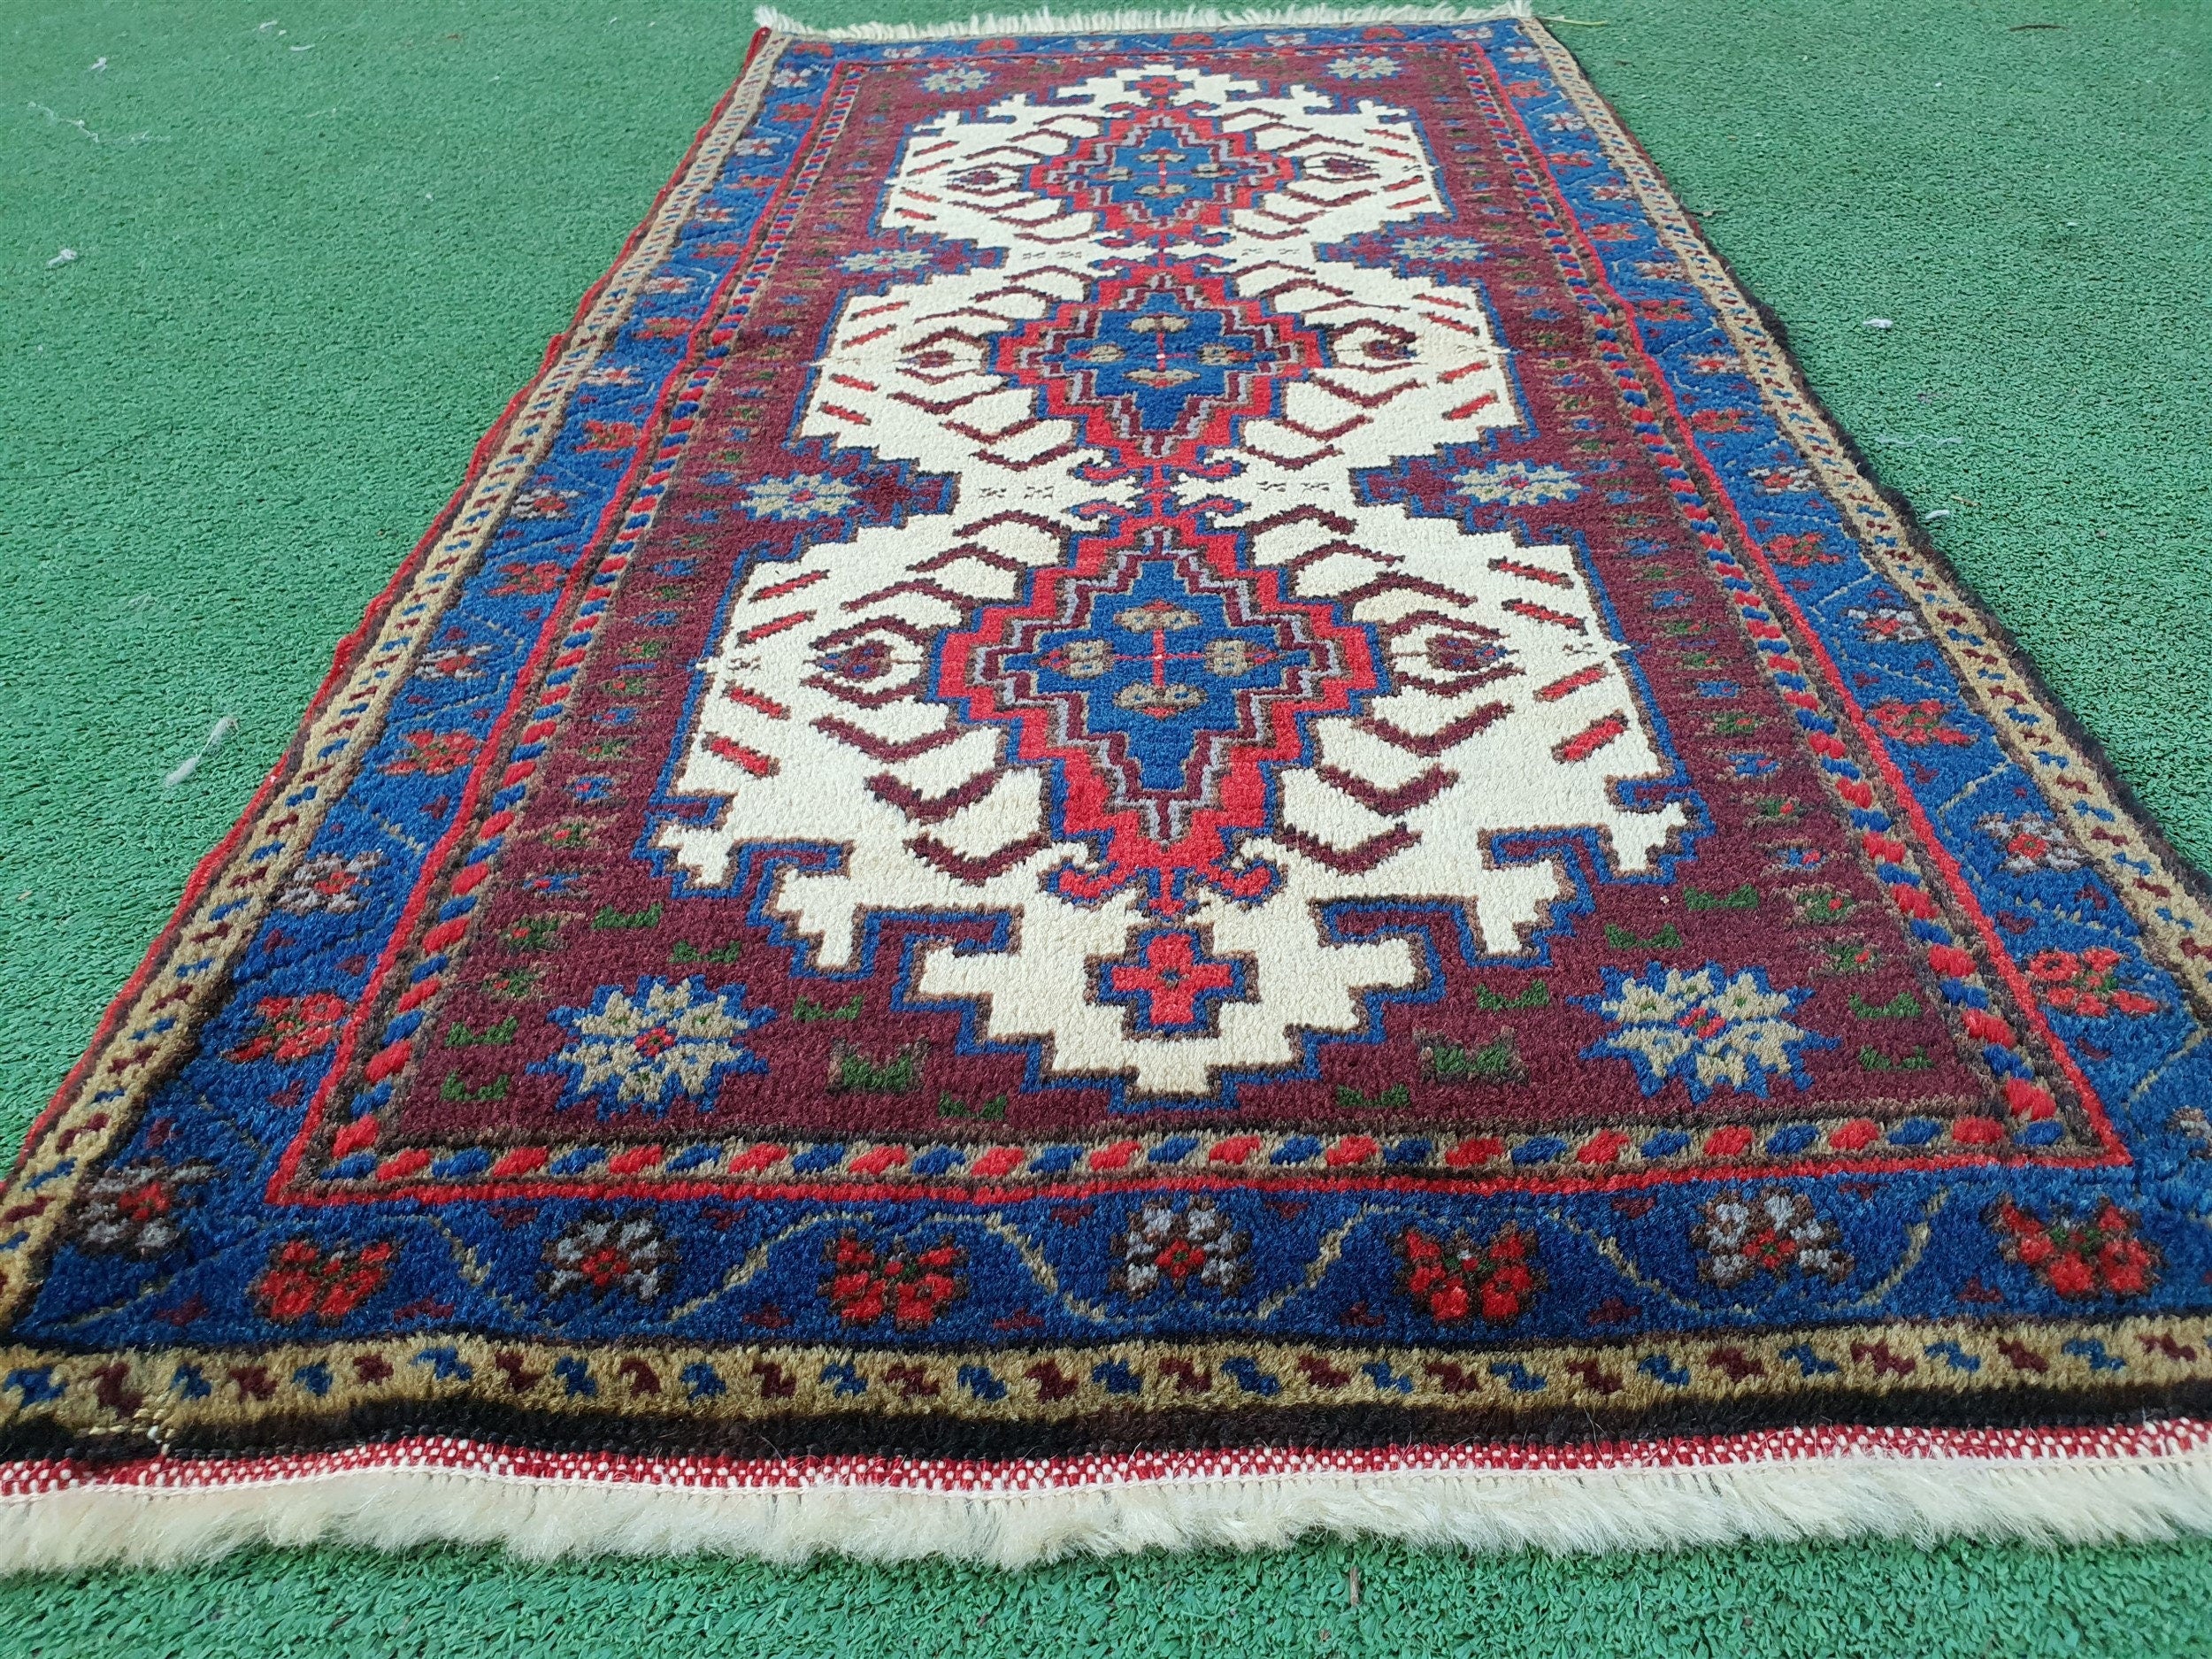 Red Blue Small Turkish Rug, 3 ft 4 in x 1 ft 7 in, Vintage Rug for Entry, Kitchen, Hallway or Bedroom Persian Oriental Boho Rustic Decor